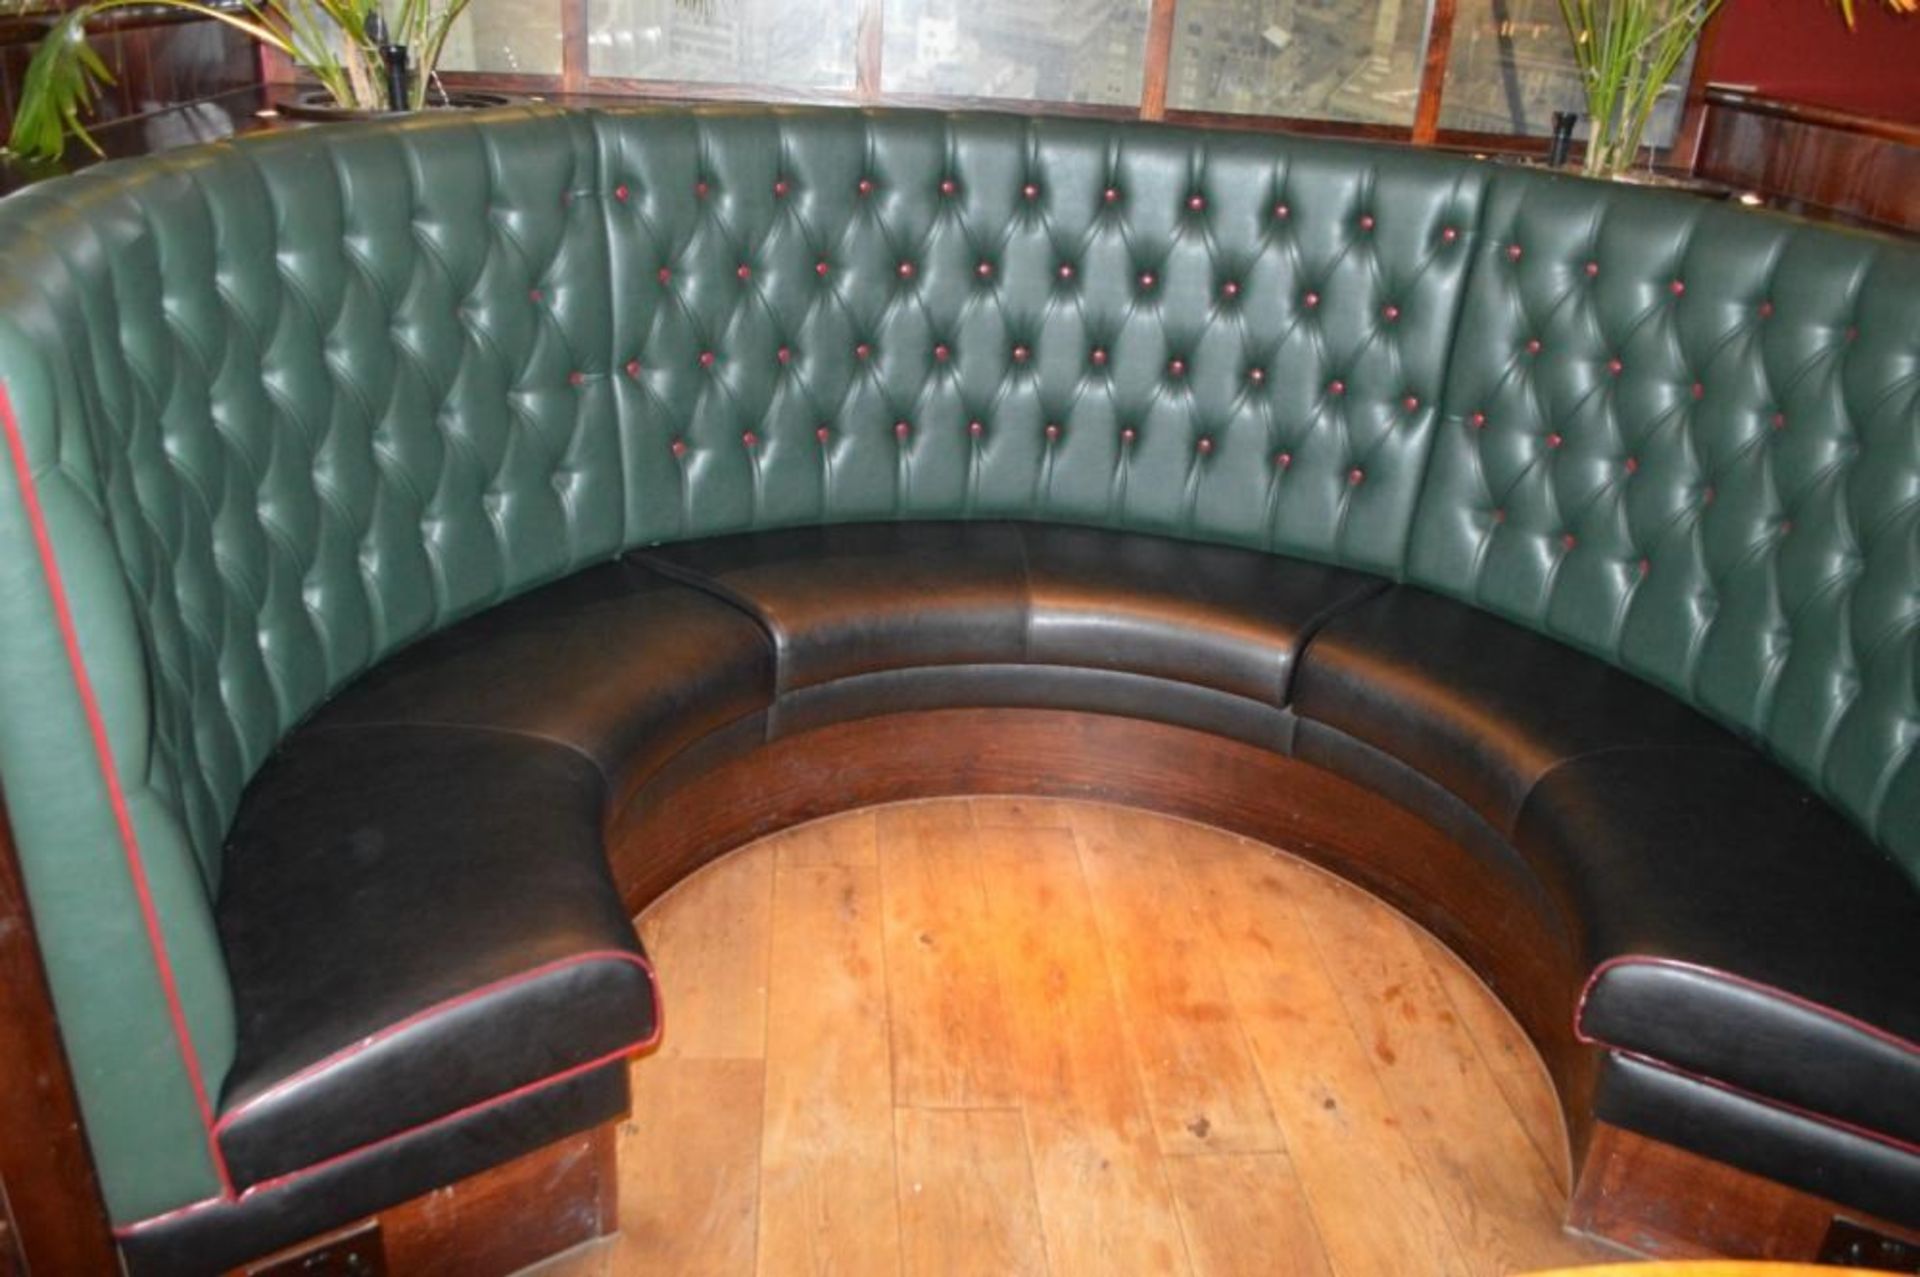 1 x Contemporary U Shape Seating Booth - Features a Leather Upholstery With Green Studded Backrests, - Image 3 of 10